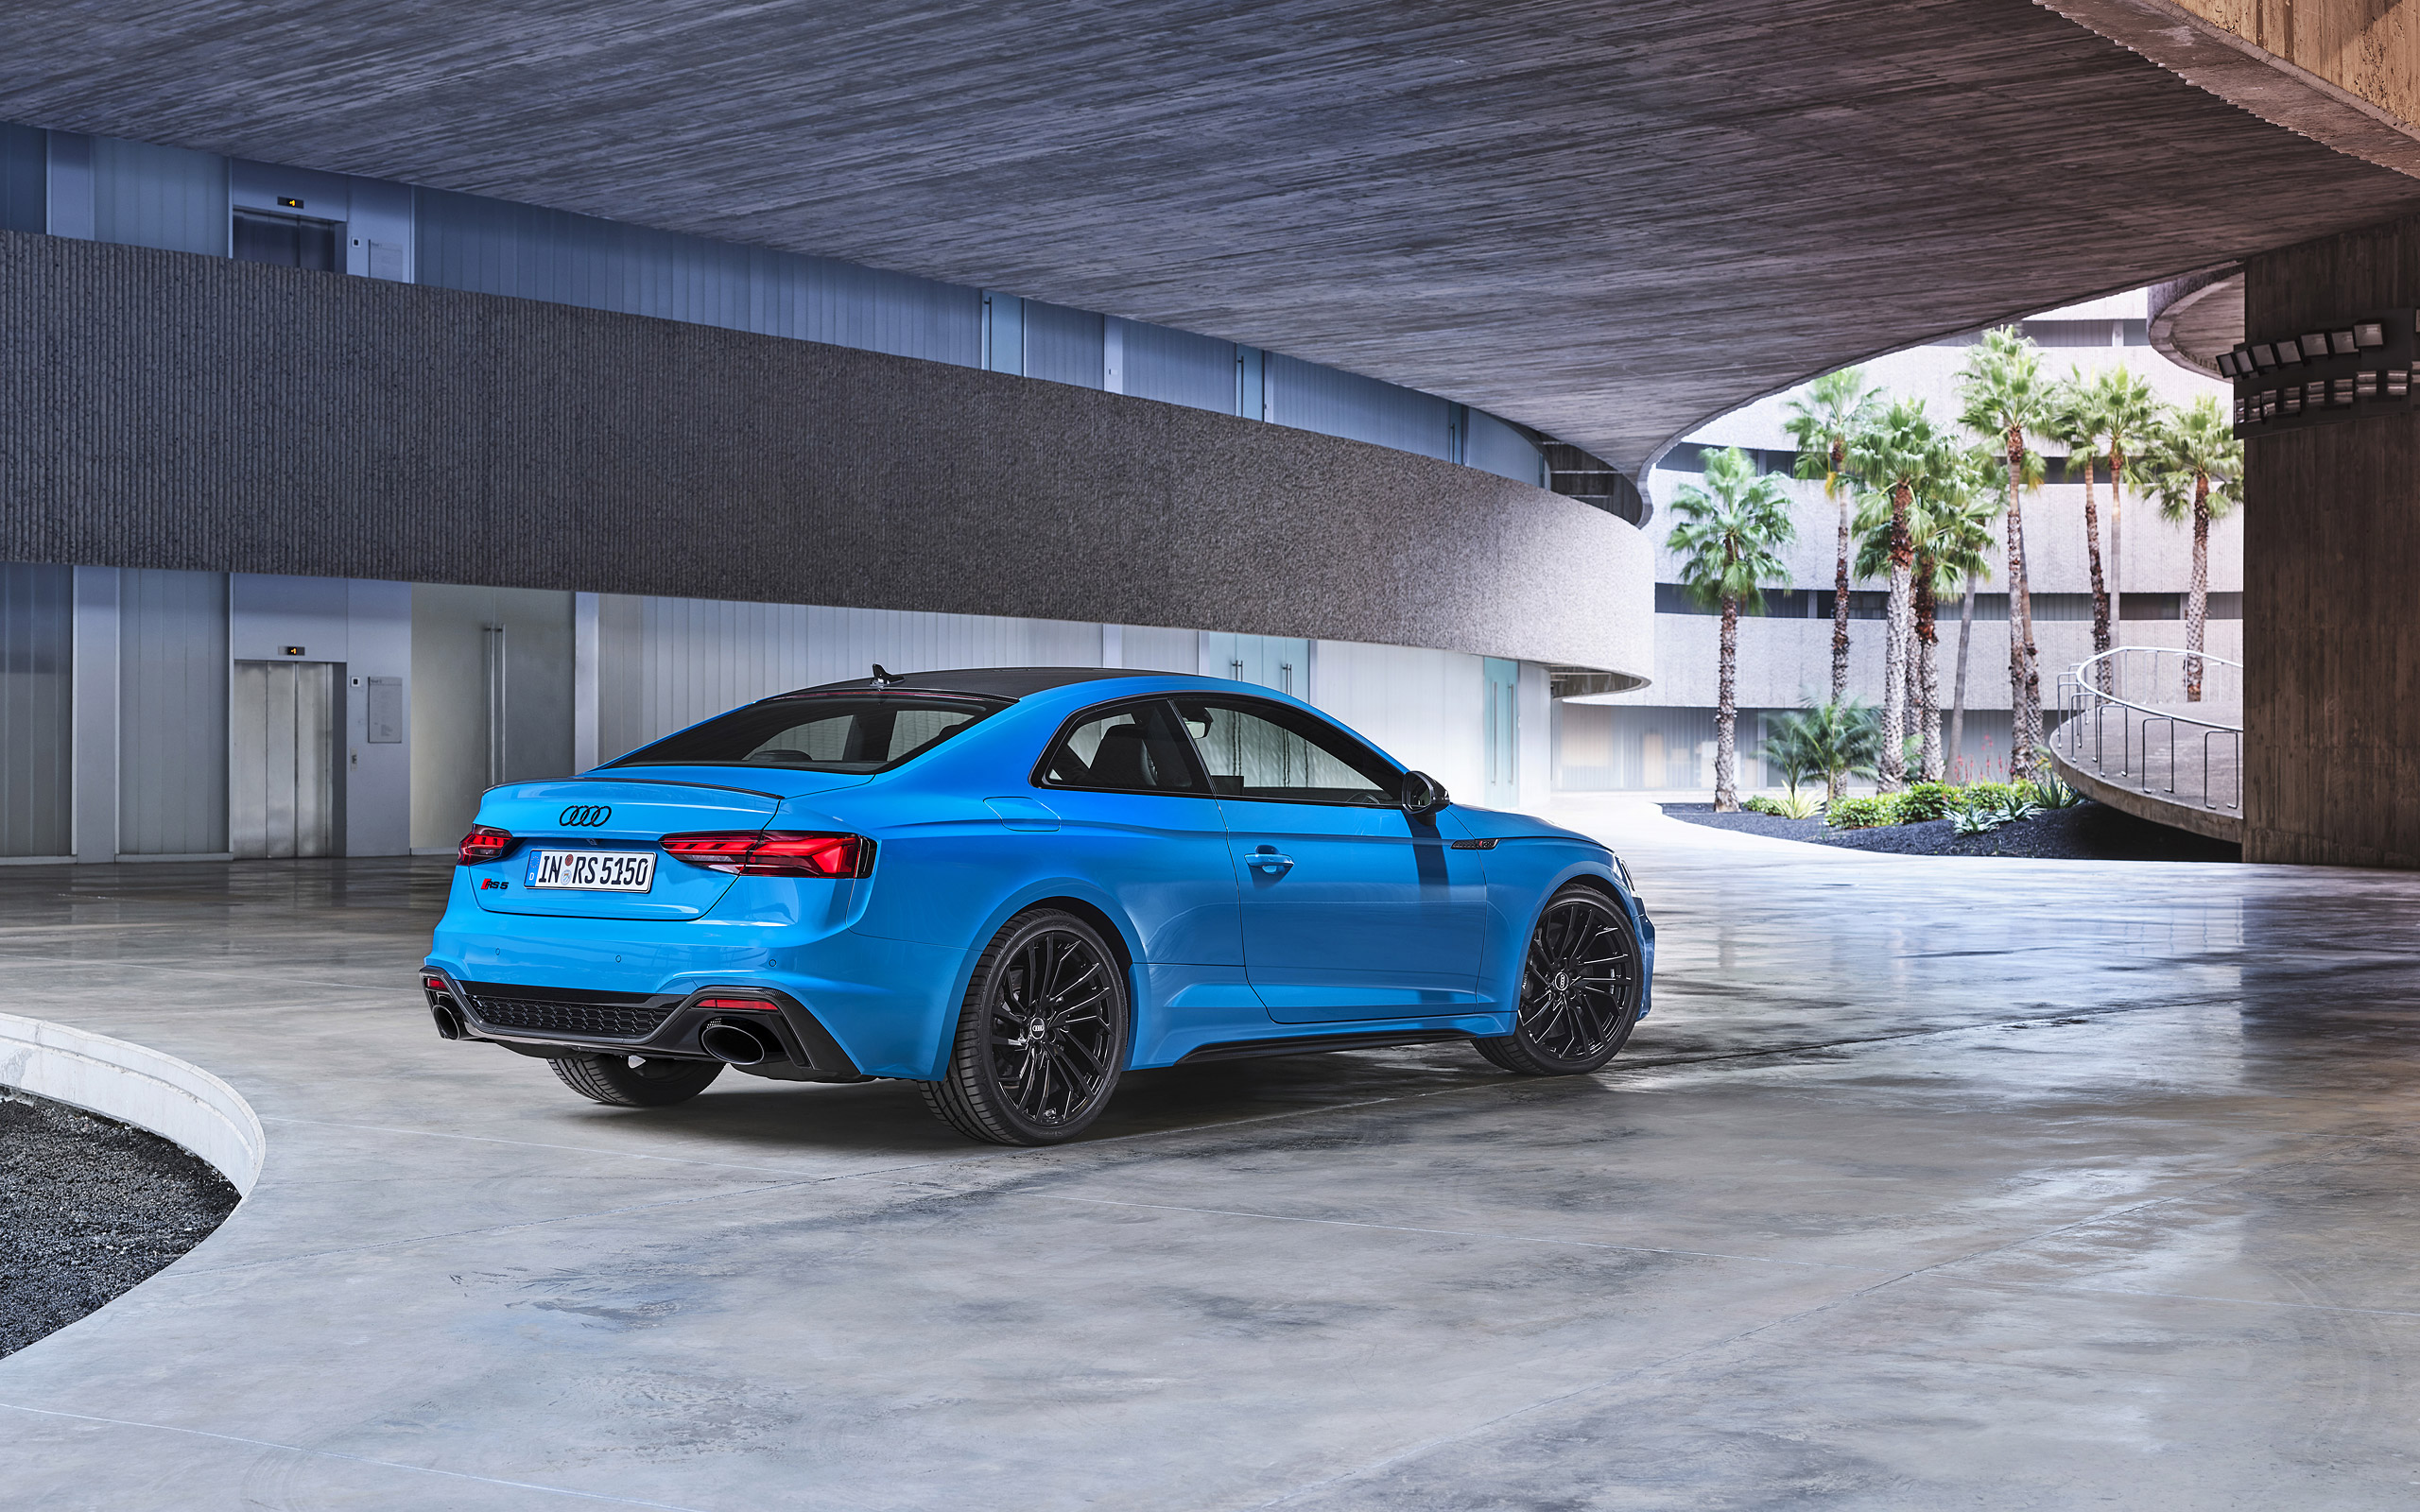  2020 Audi RS5 Coupe Wallpaper.